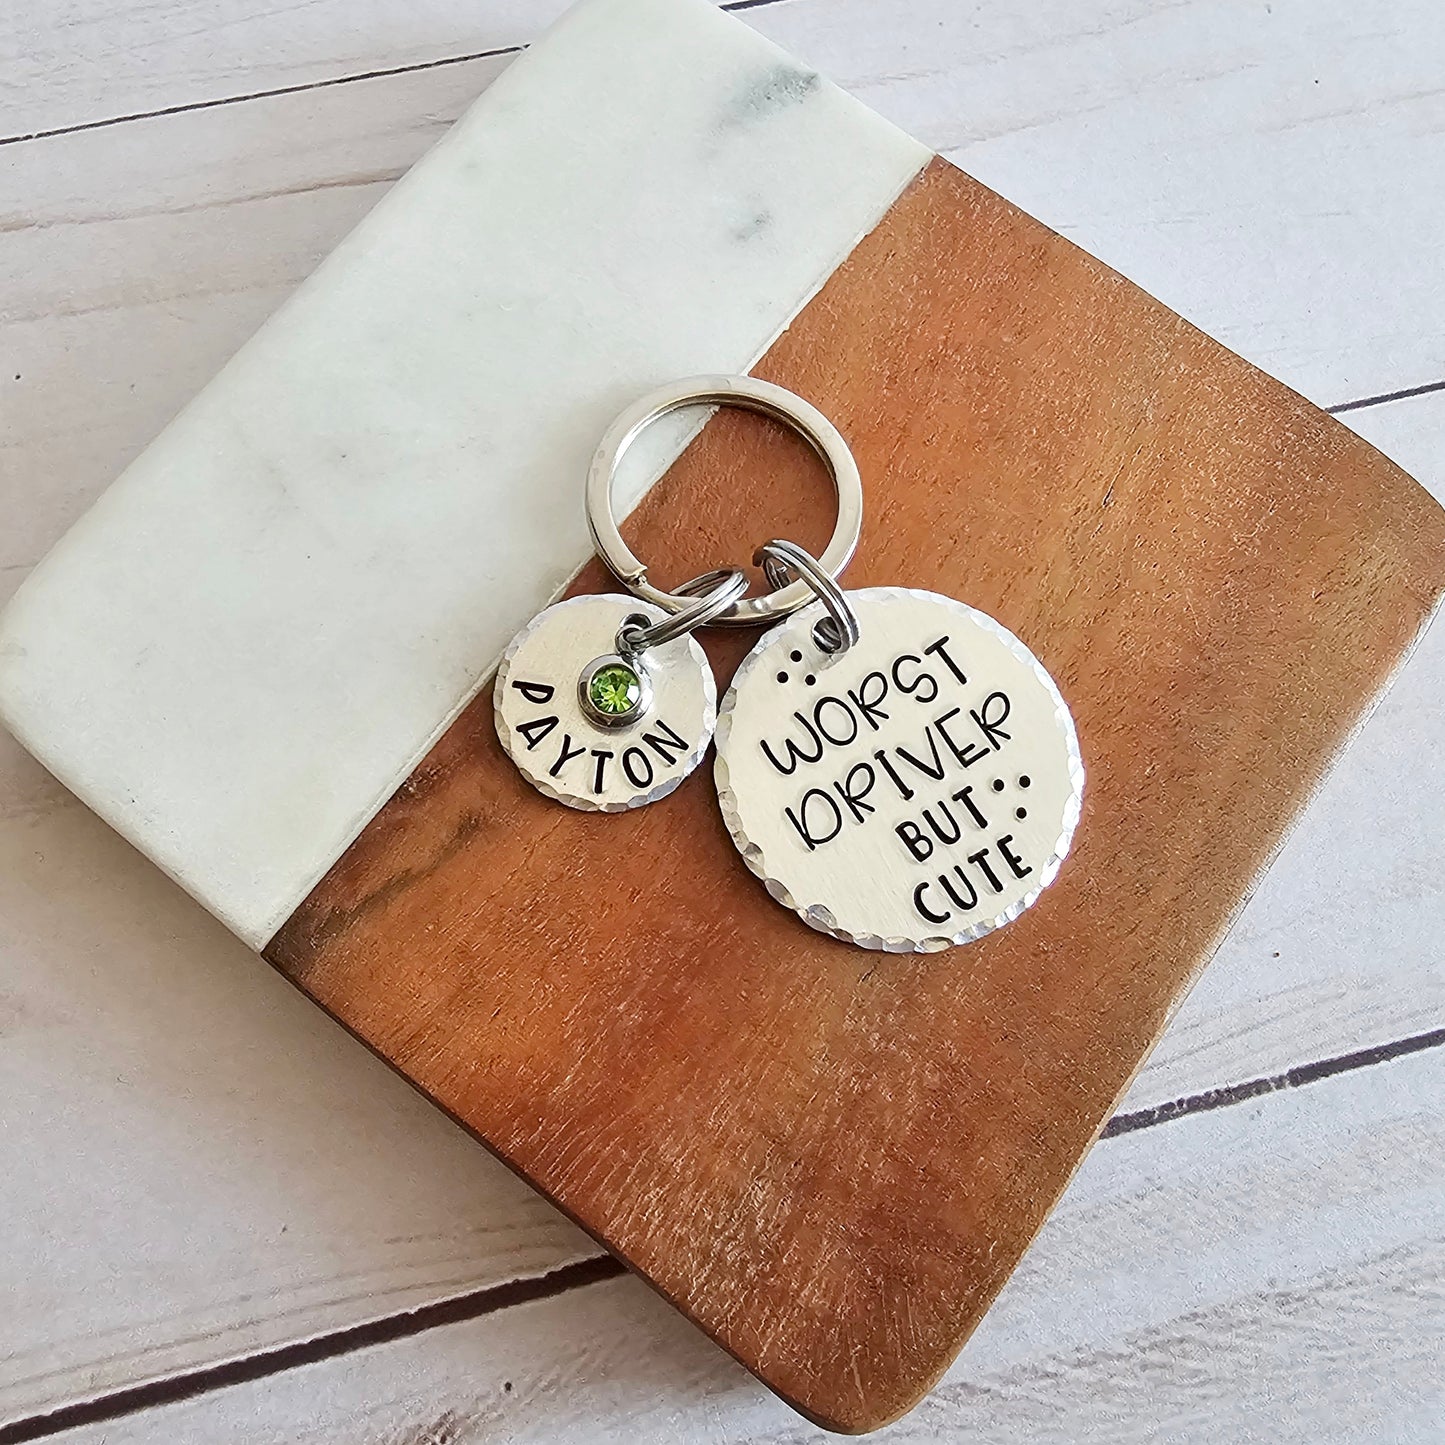 Worst Driver But Cute Keychain, Funny Sweet 16 Gift for Daughter, New Driver Key Chain